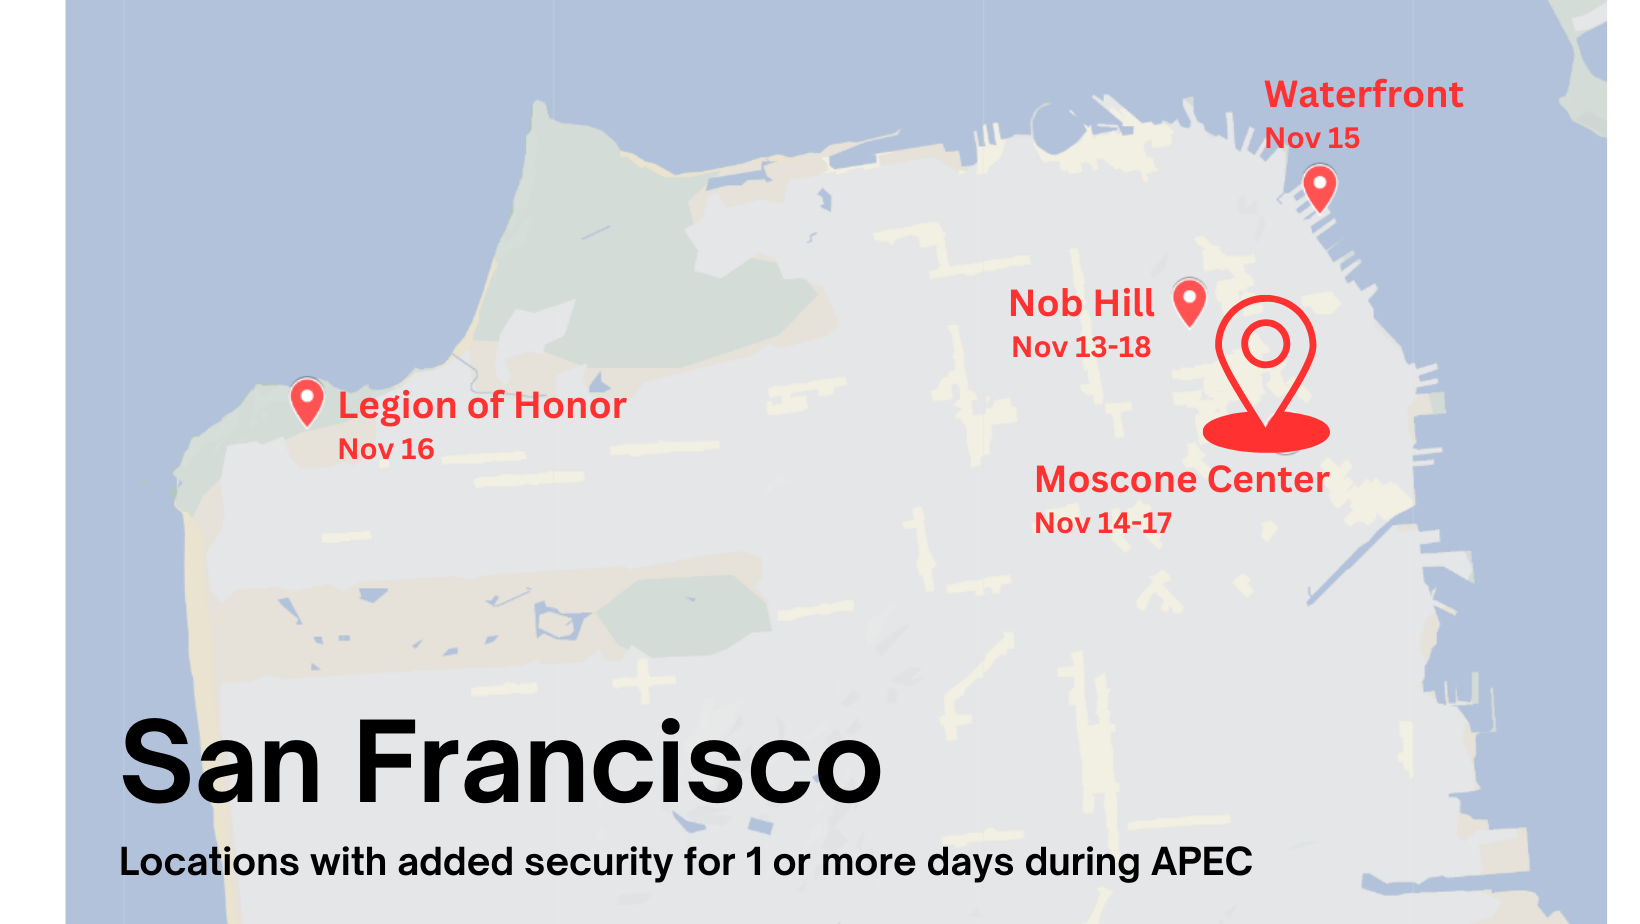 map of sf with APEC security areas marked in red